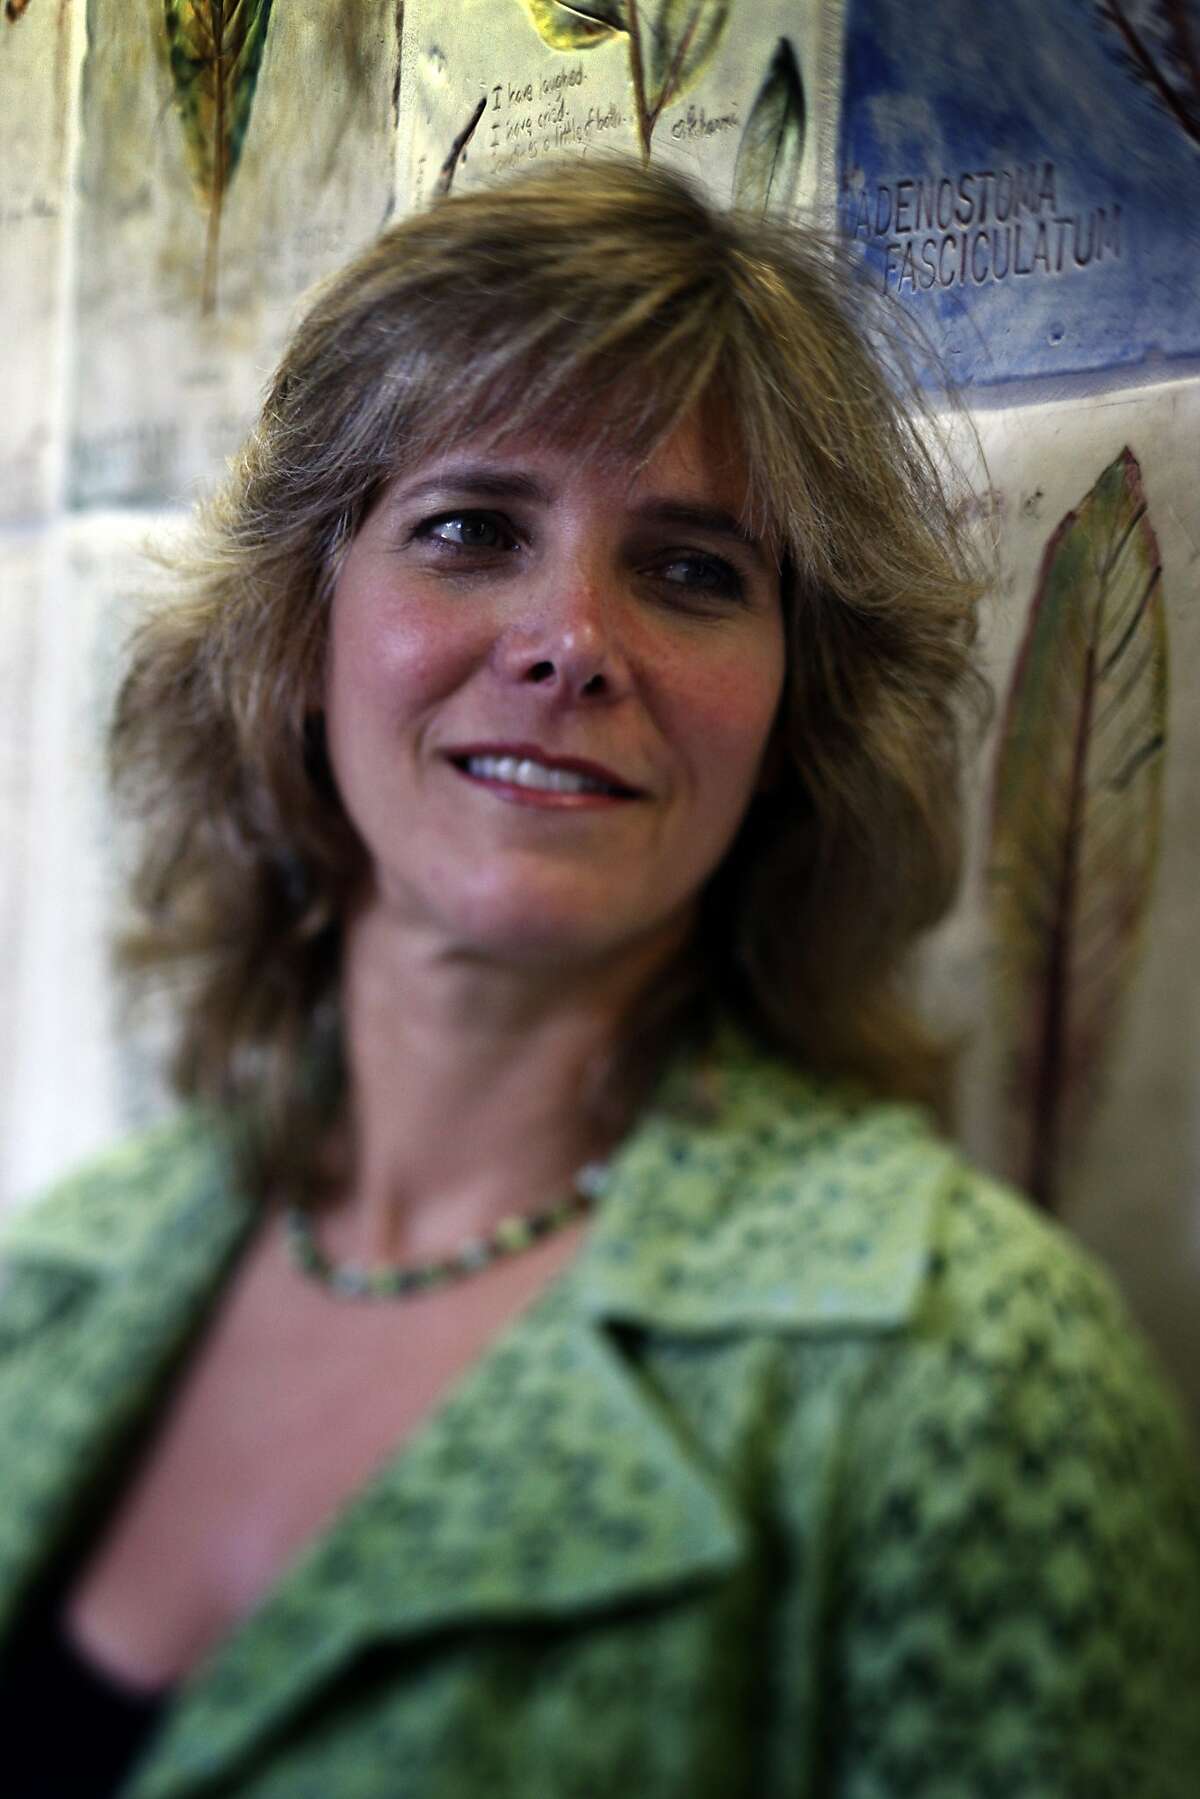 Dr. Laura Esserman is seen at the women's health center at UCSF's Mount Zion campus in San Francisco, Calif., on Thursday, July 9, 2009. Esserman is director of the breast cancer center at the facility.